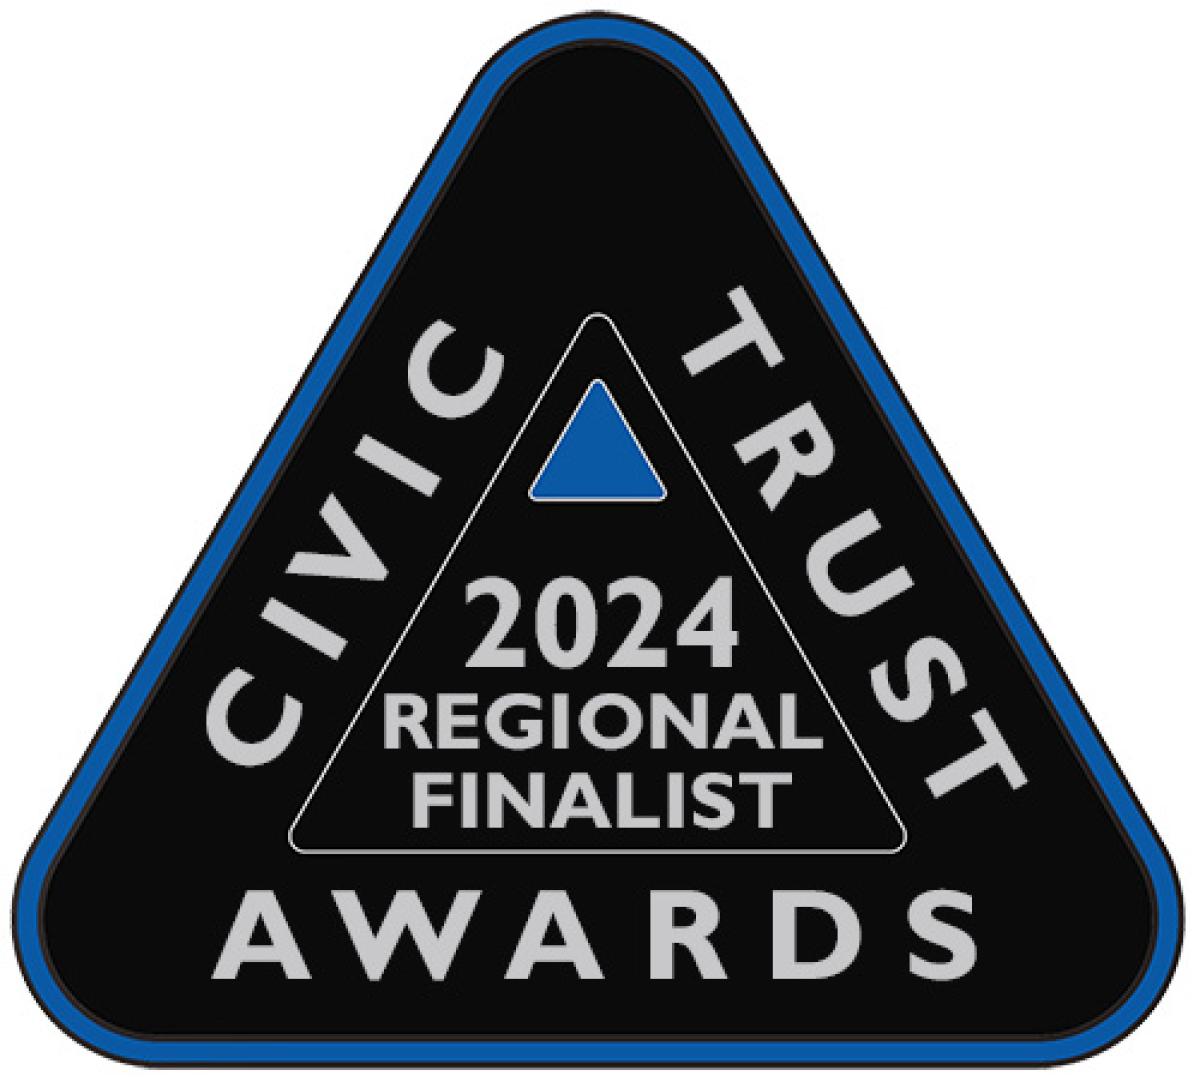 Triangular logo with the works Civic, Trust and Awards written on each outside edge.  Inside, the words 2024 Regional Finalists are shown.